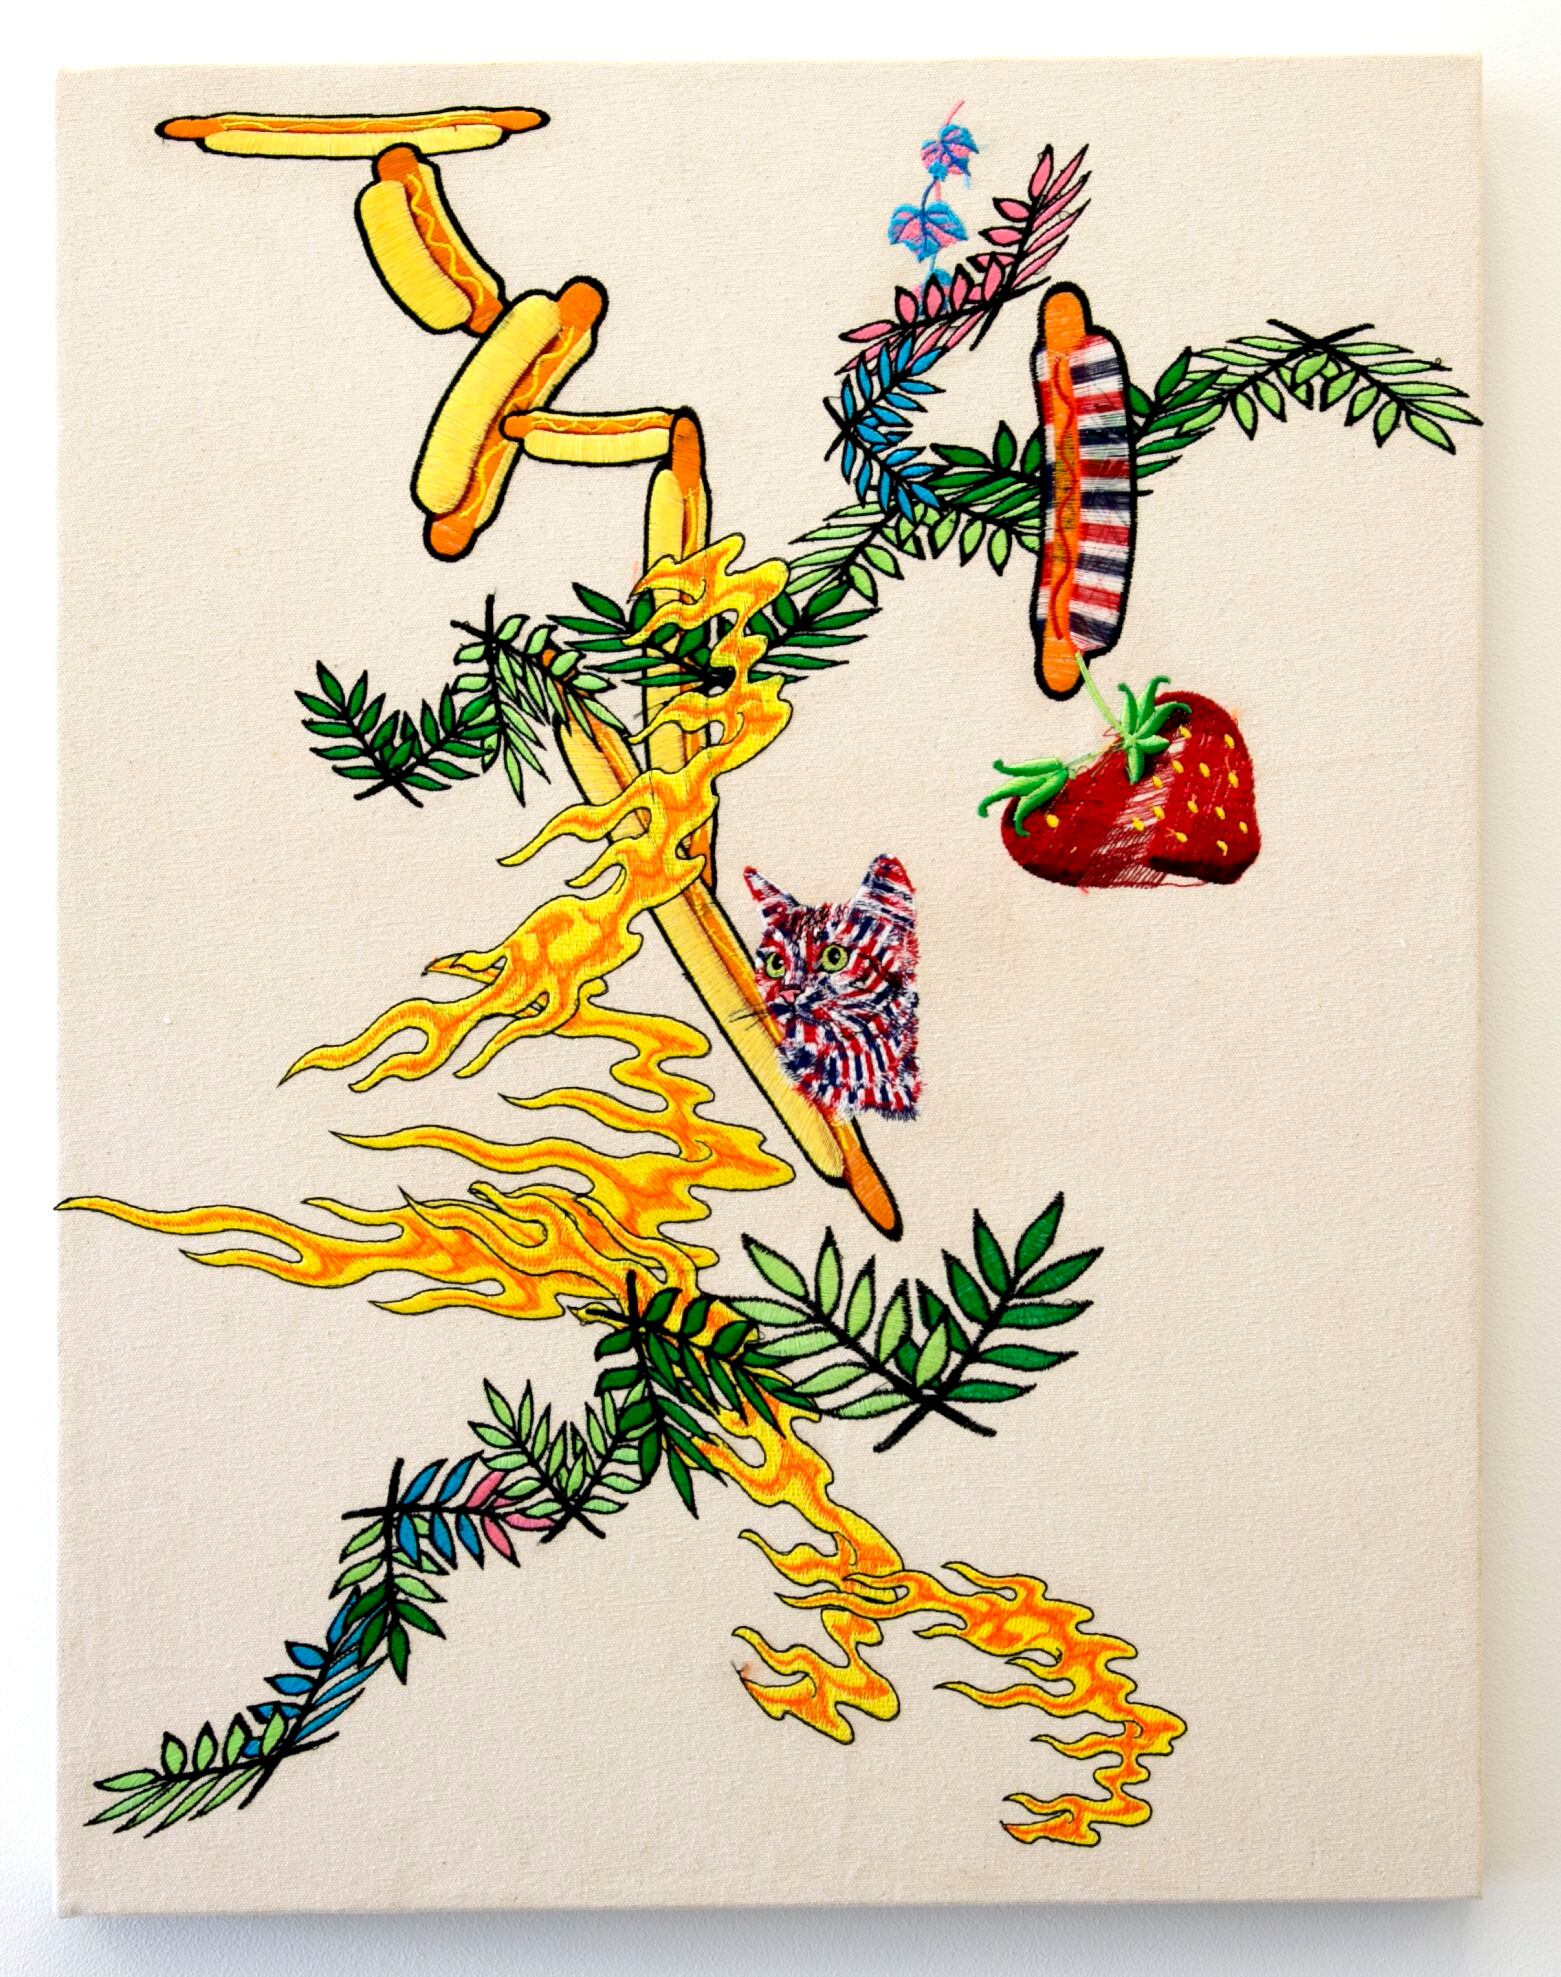 Borna Sammak's "Untitled," a 2014 embroidery-on-canvas work, is featured in the "Fresh...